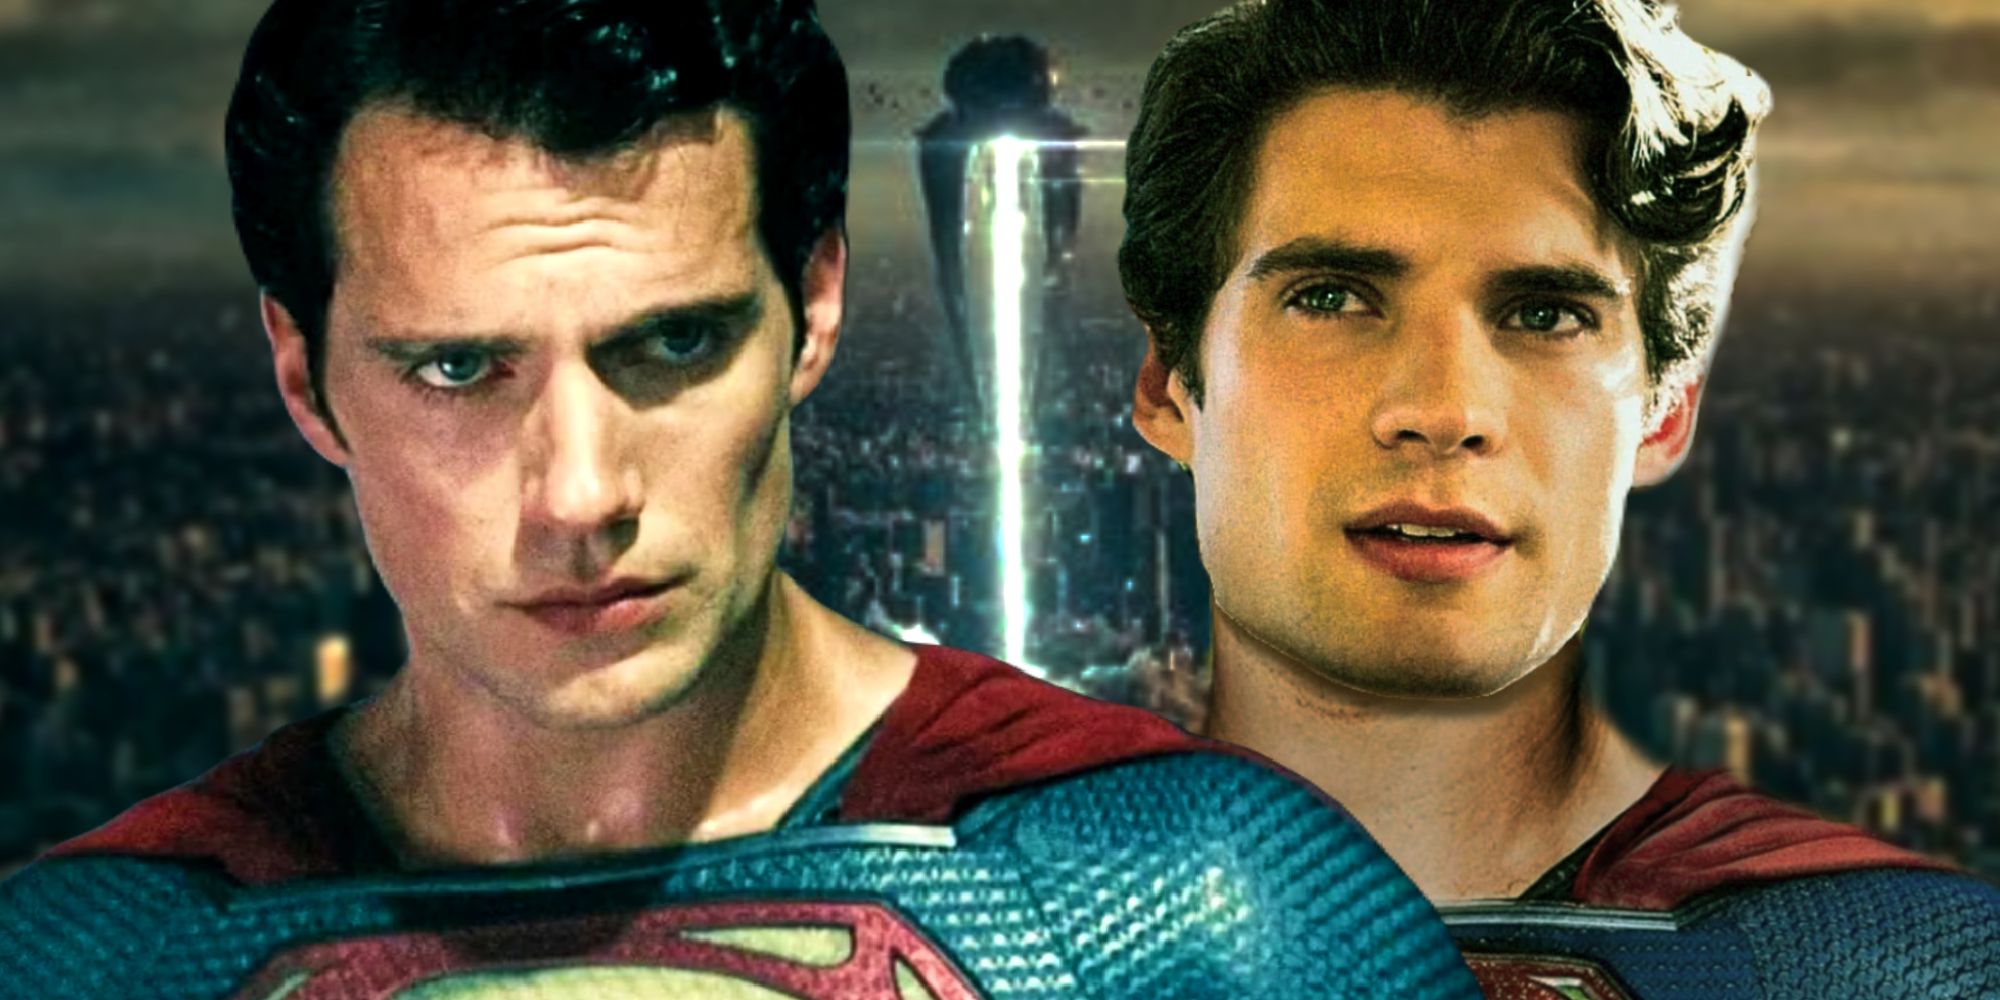 Henry Cavill and David Corenswet as Superman in DC Movies